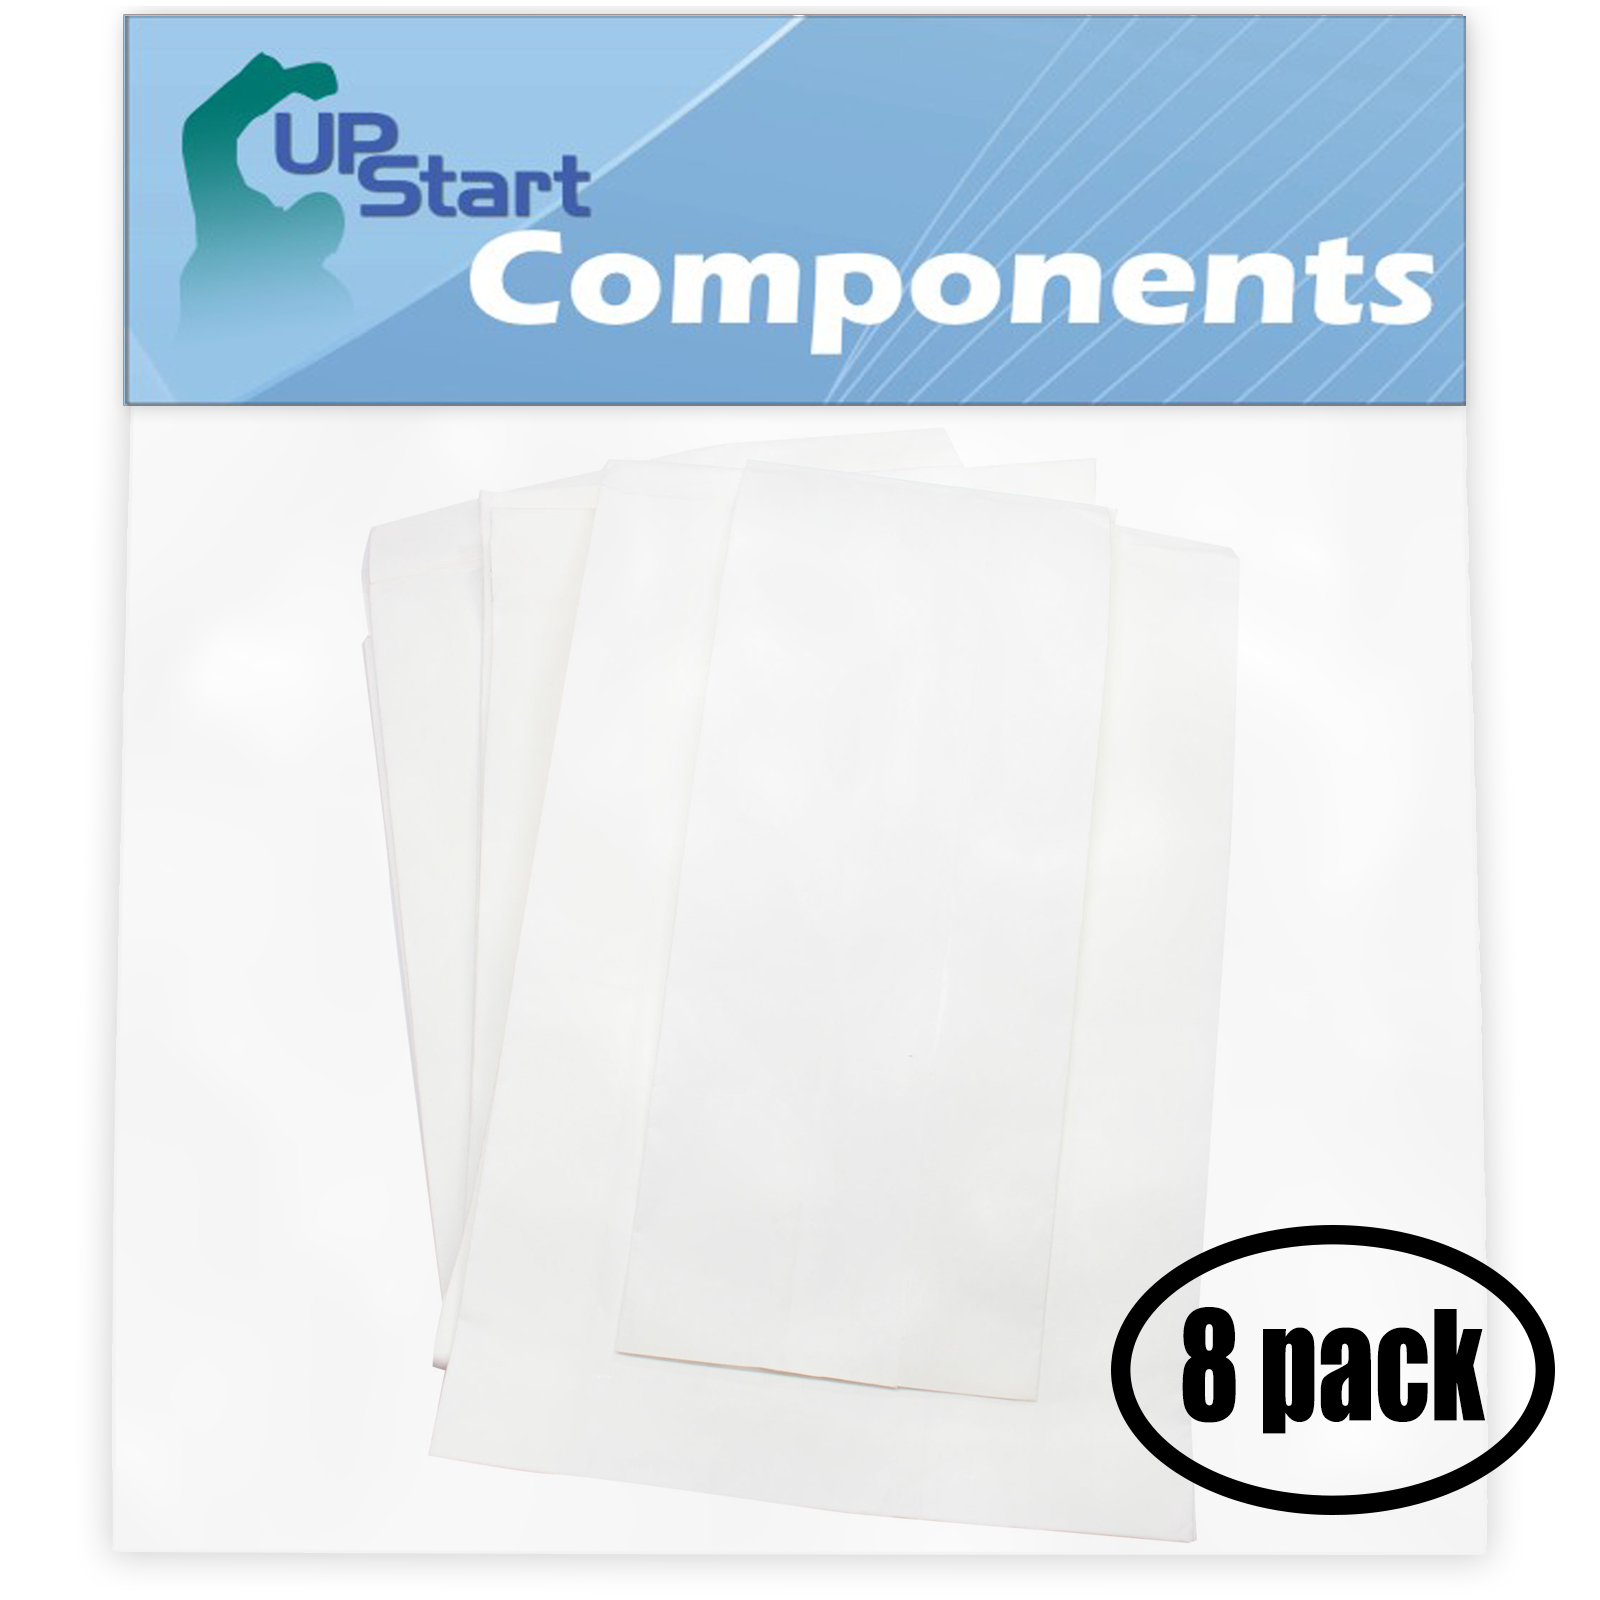 24 Replacement for Singer SST020 Vacuum Bags - Compatible with Singer SUB-1 Vacuum Bags (8-Pack - 3 Vacuum Bags per Pack) - image 1 of 4